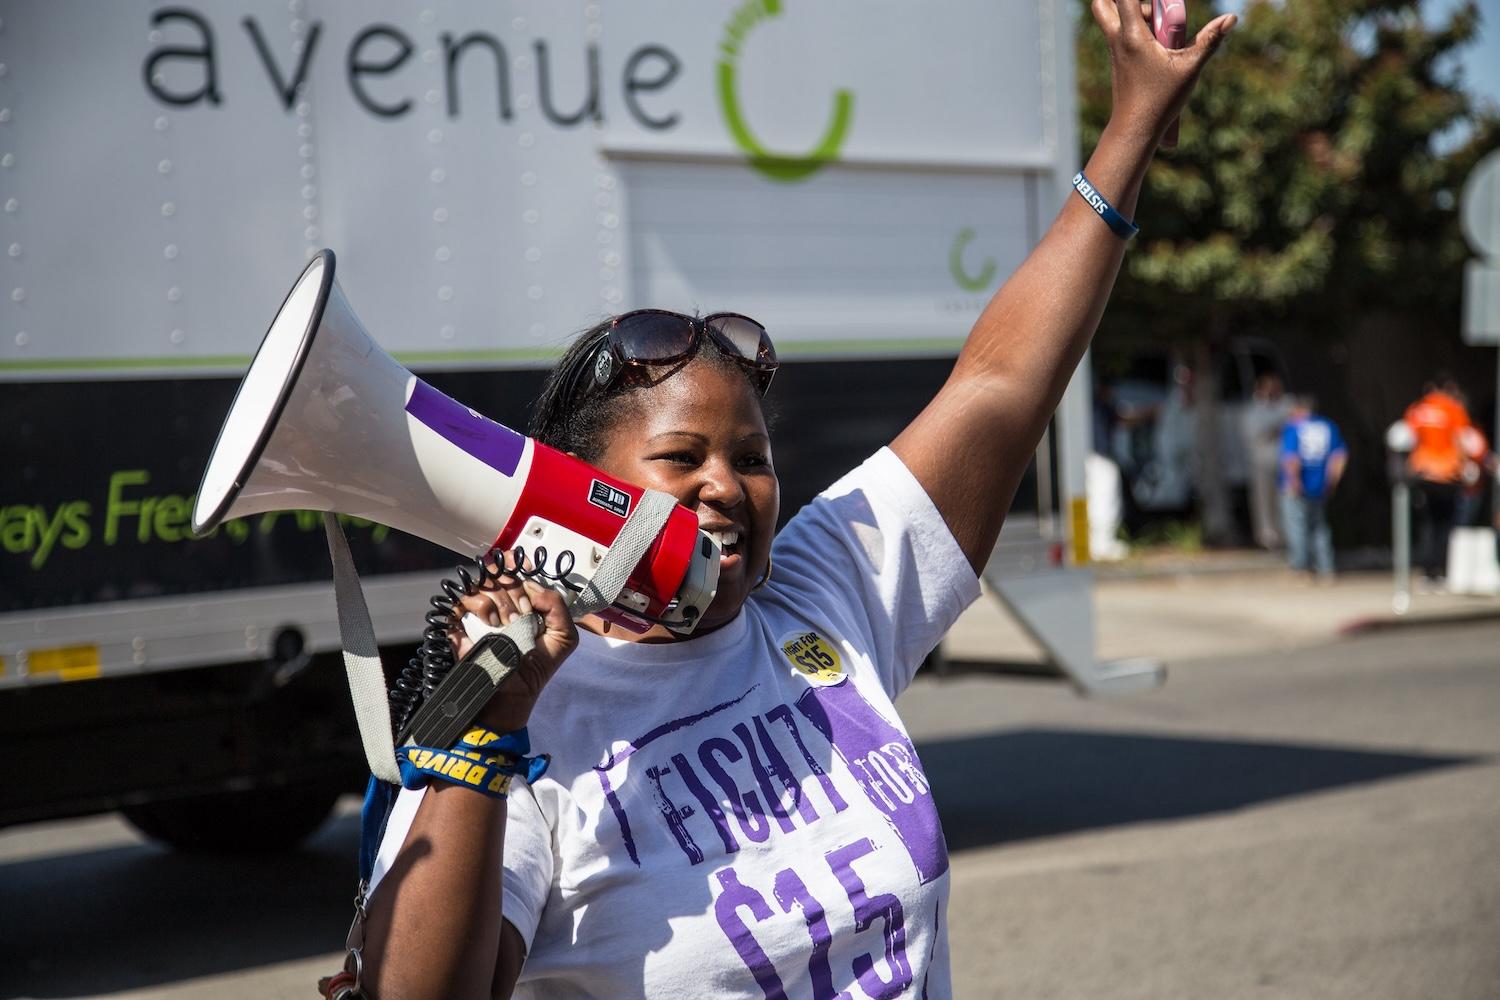 Fight for $15 demonstration in Los Angeles in 2015 - social solutions for equity 